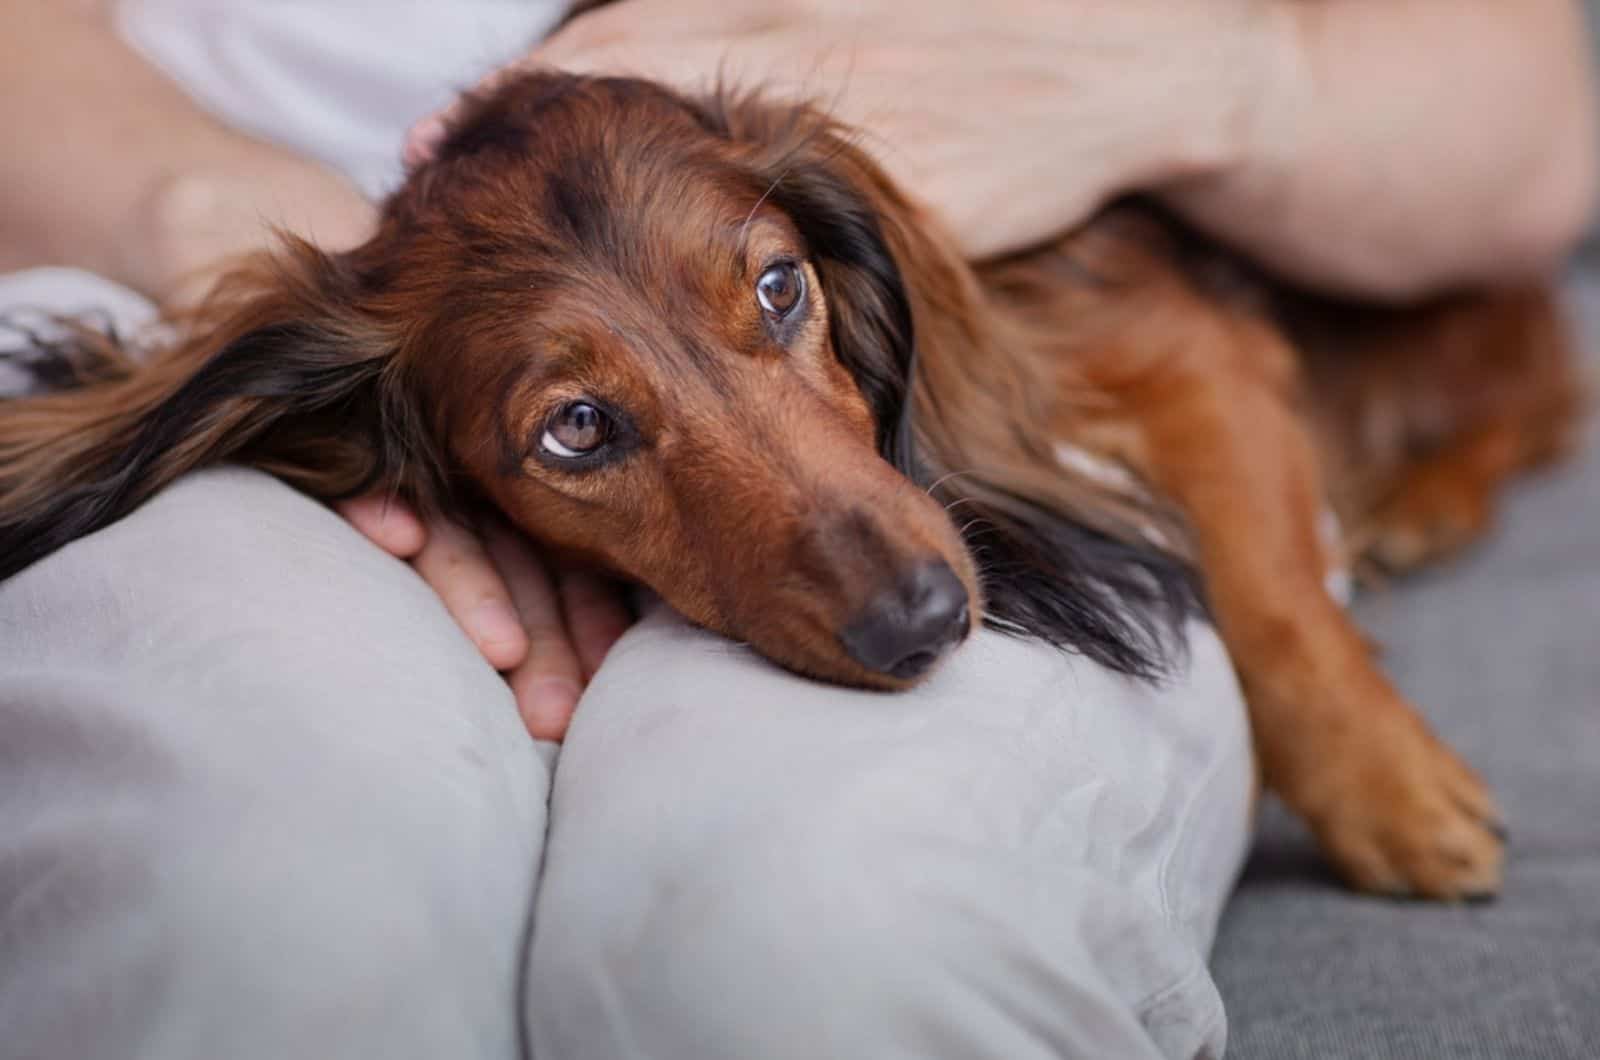 Why Is My Dachshund So Afraid Of People? 3 Answers